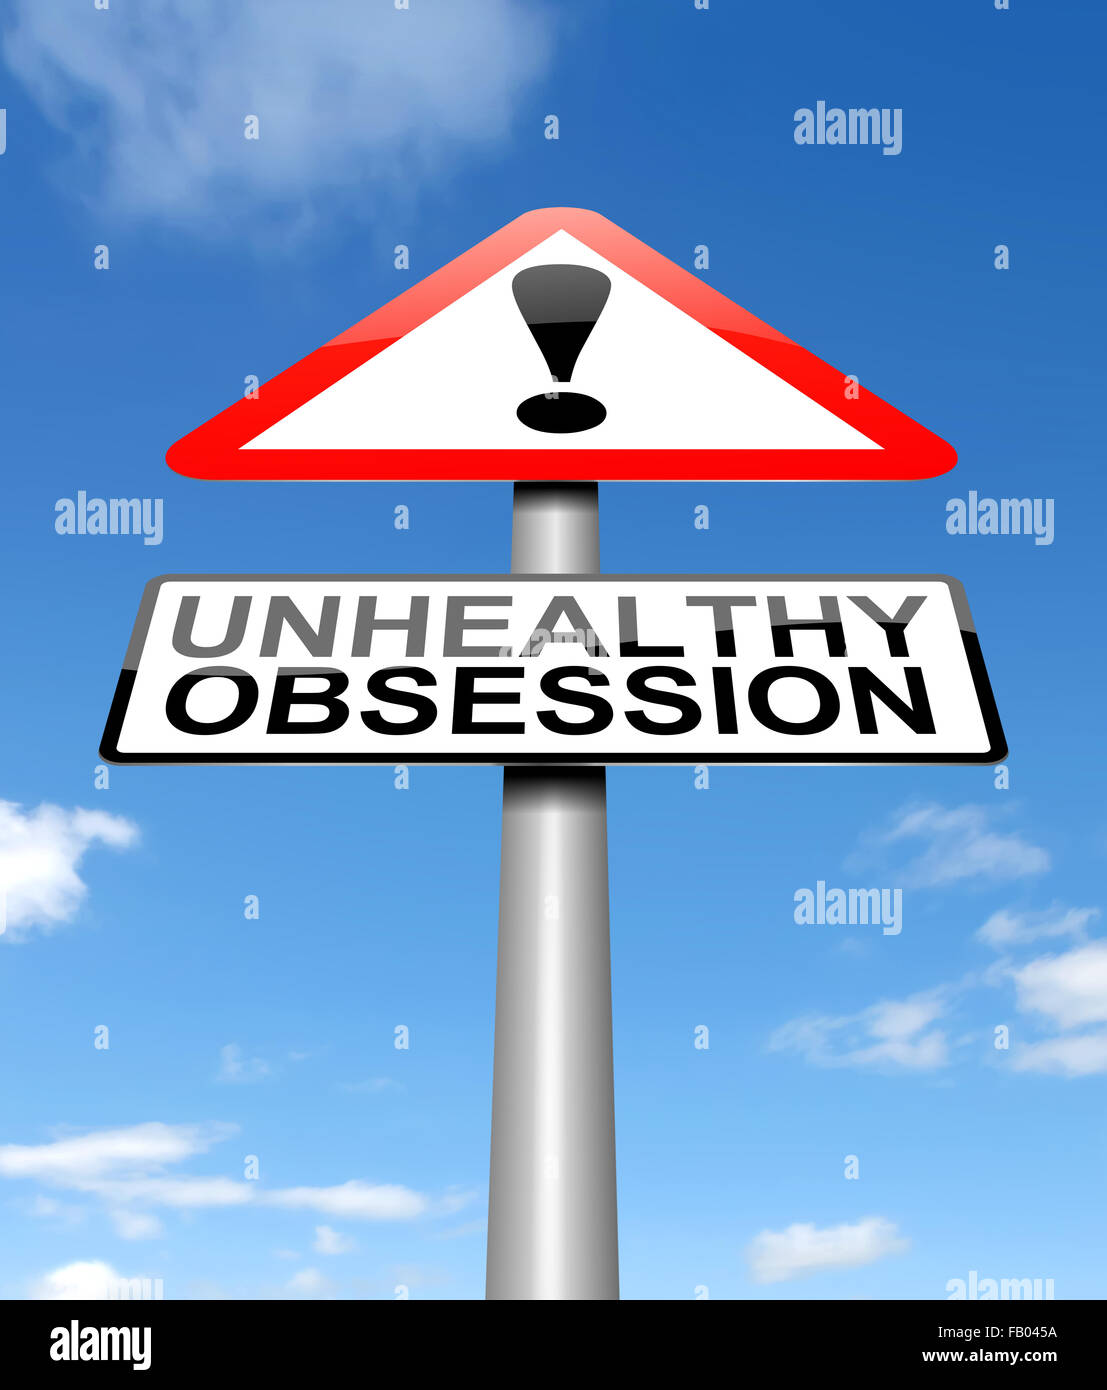 Unhealthy obsession concept. Stock Photo